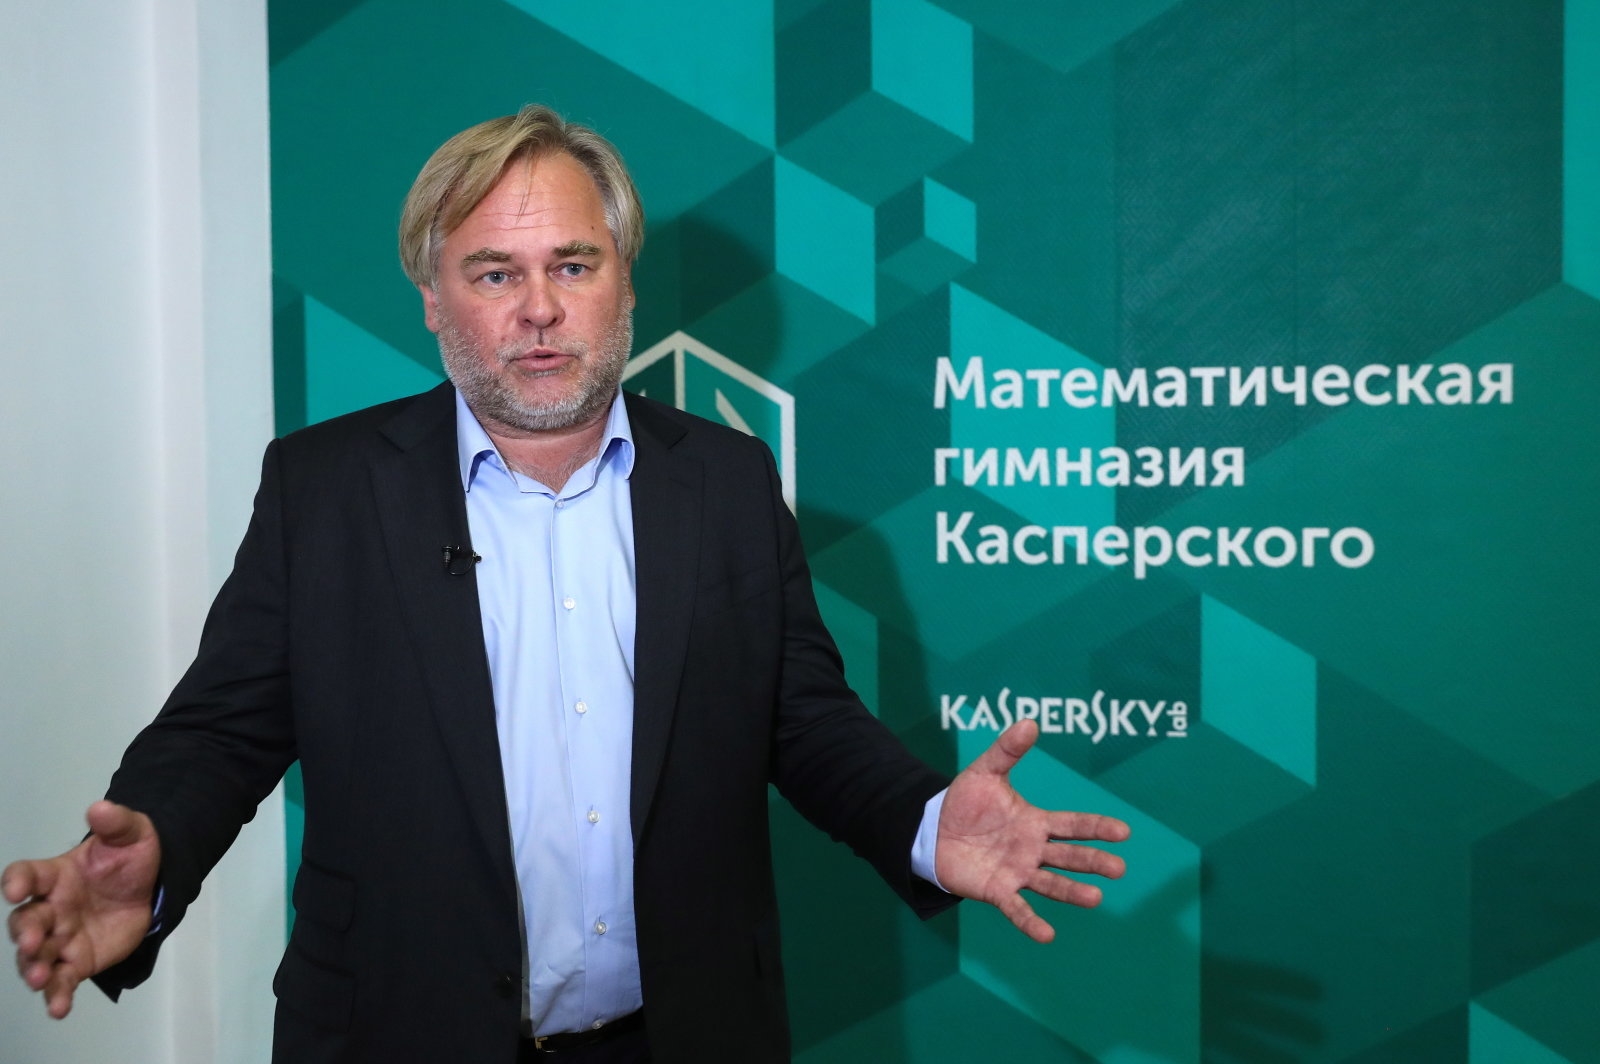 Kaspersky's antivirus software takes non-threatening files | DeviceDaily.com